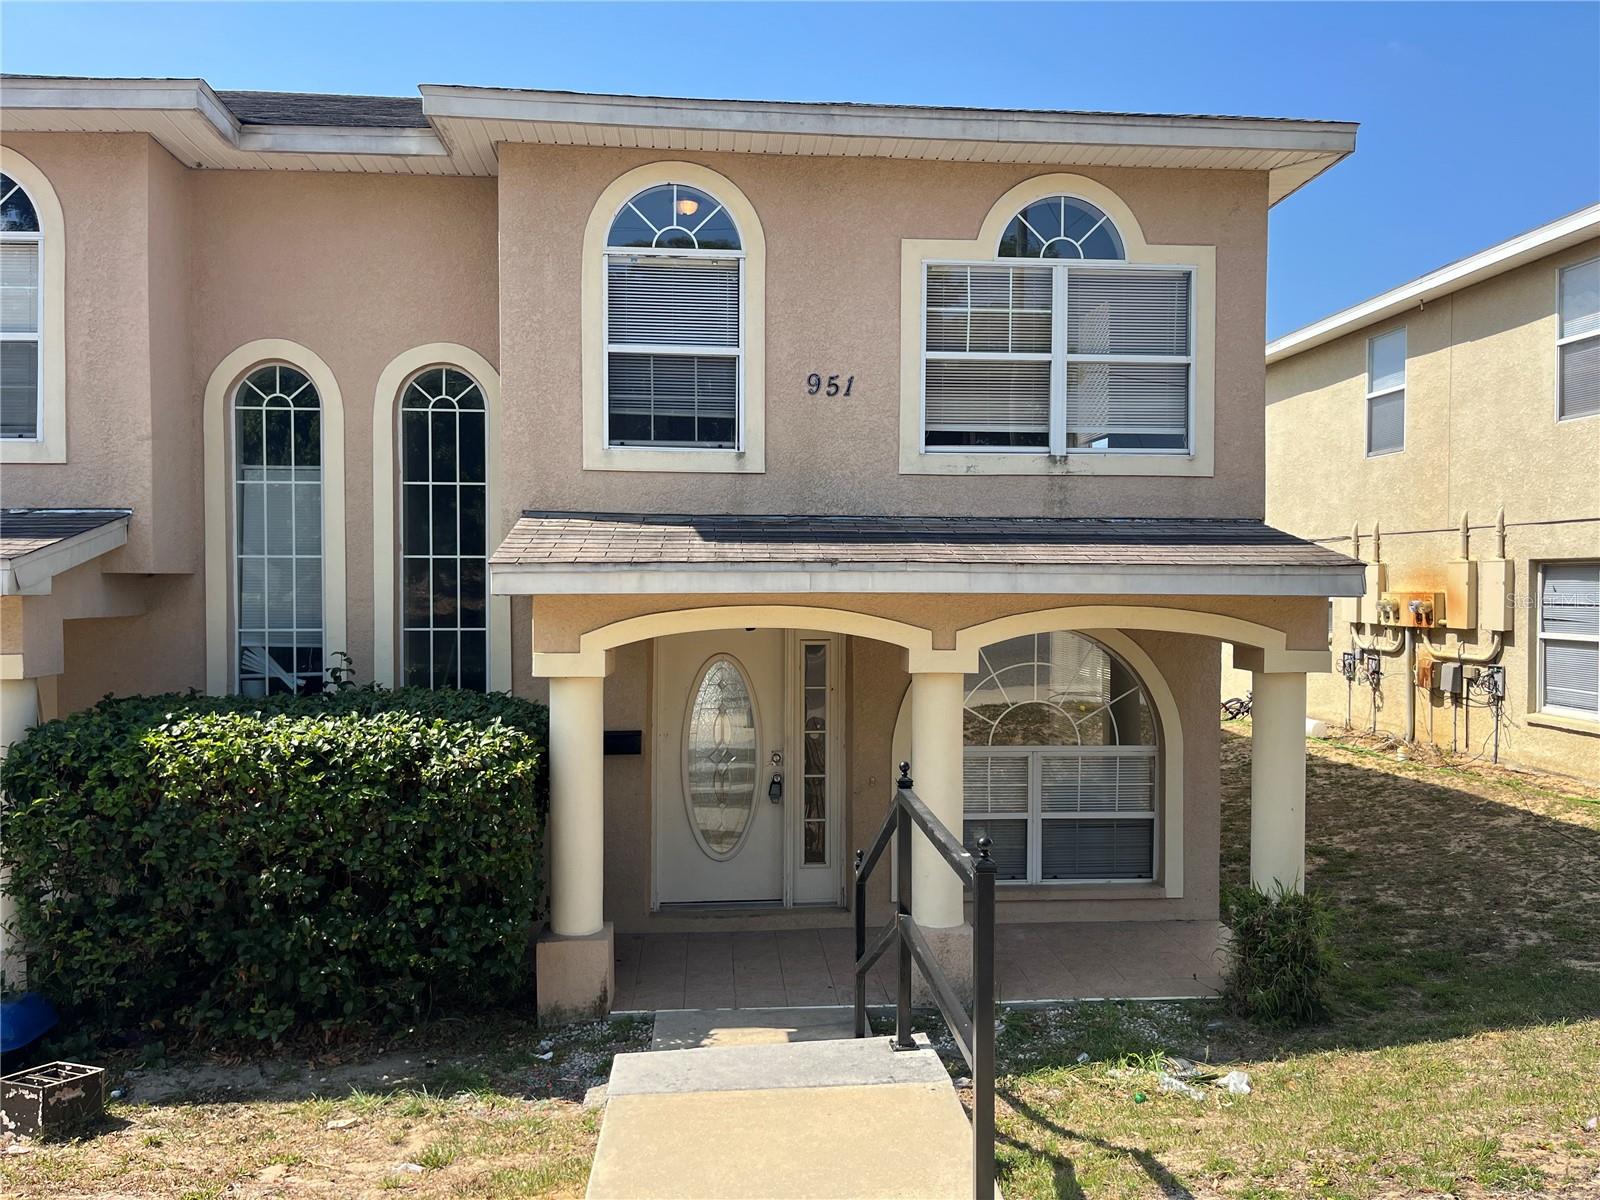 View HAINES CITY, FL 33844 townhome